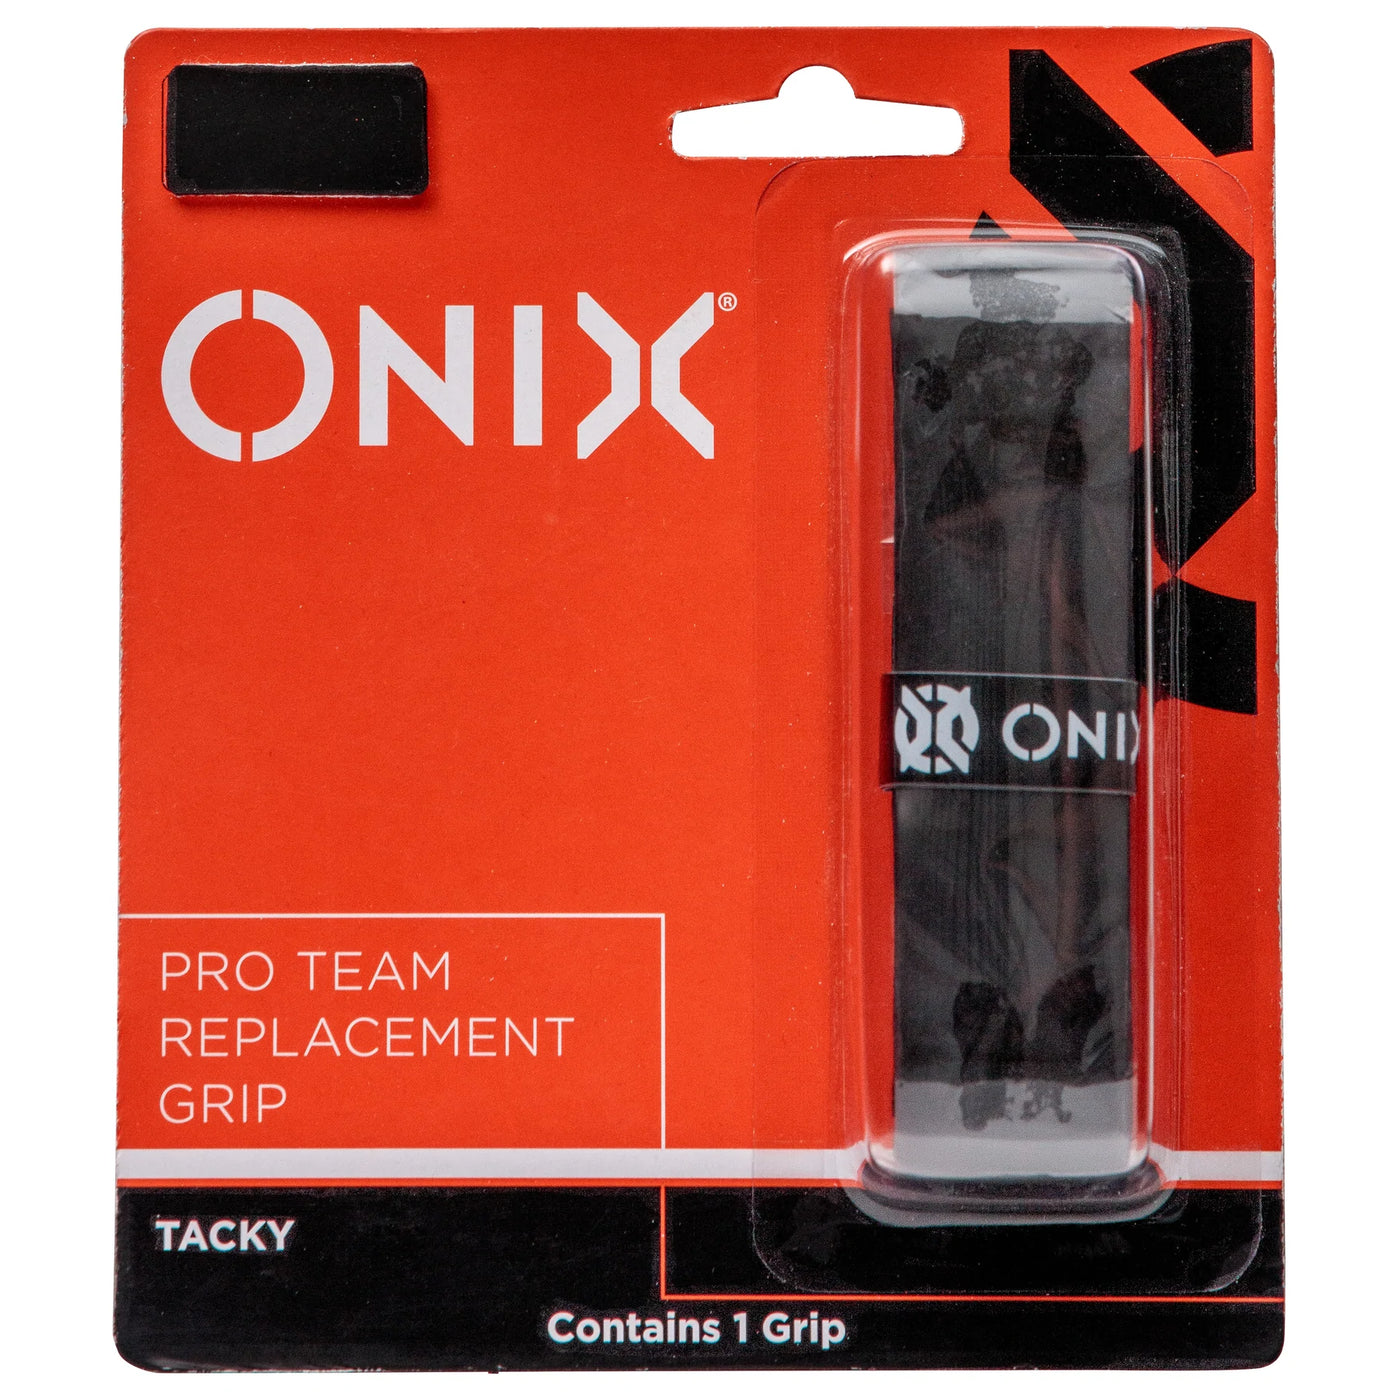 Onix Pro Team Replacement Grip